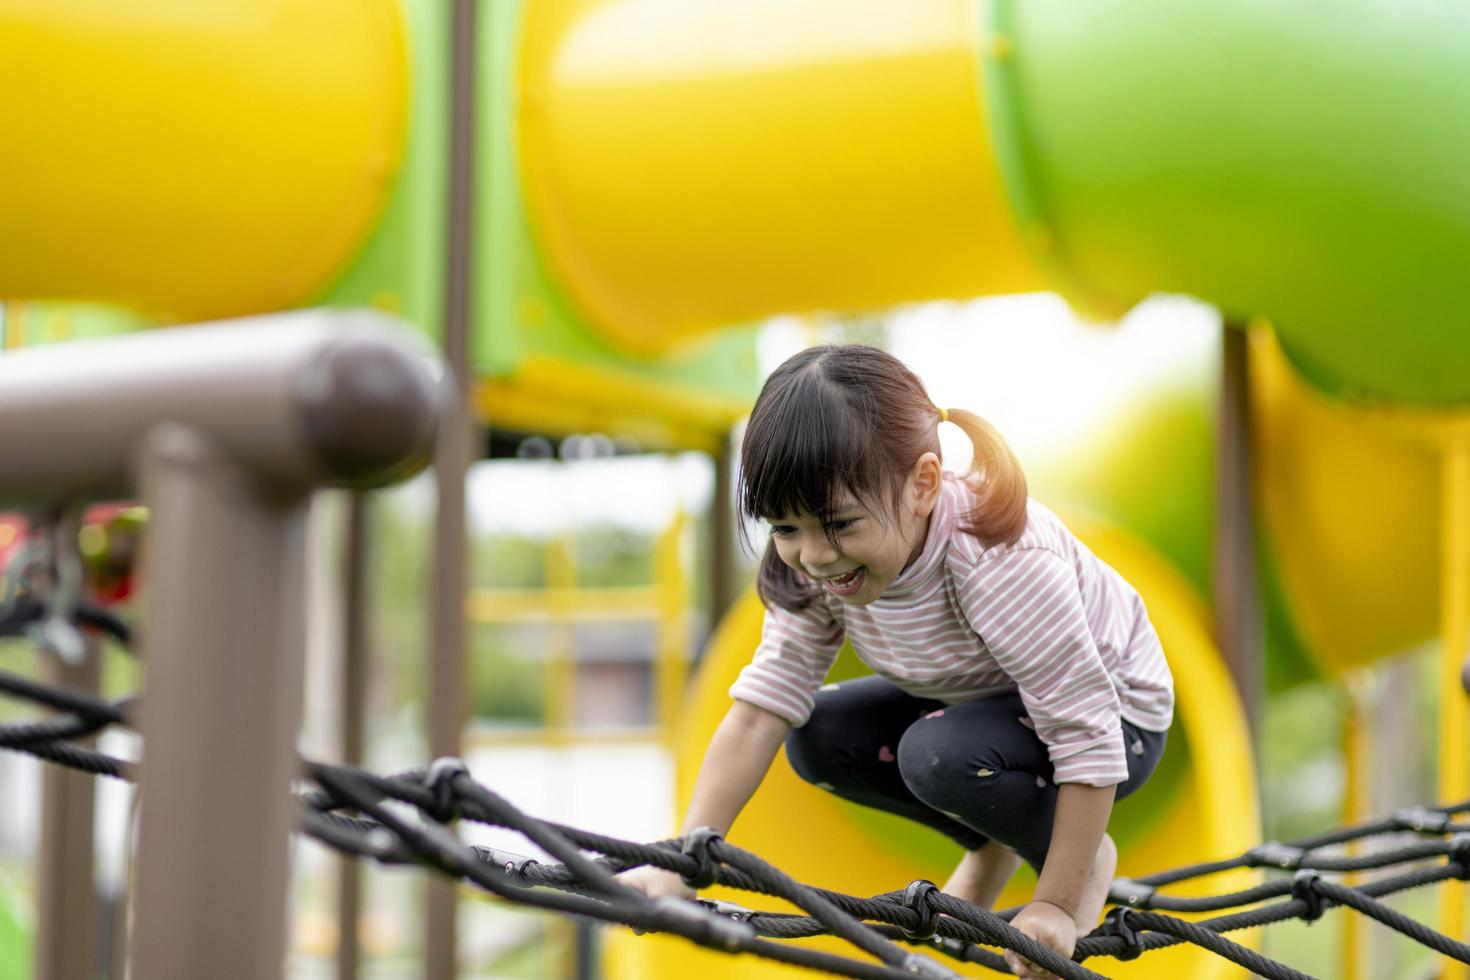 Child playing on outdoor playground. Kids play on school or kindergarten yard. Active kid on colorful slide and swing. Healthy summer activity for children. Little boy climbing outdoors. photo